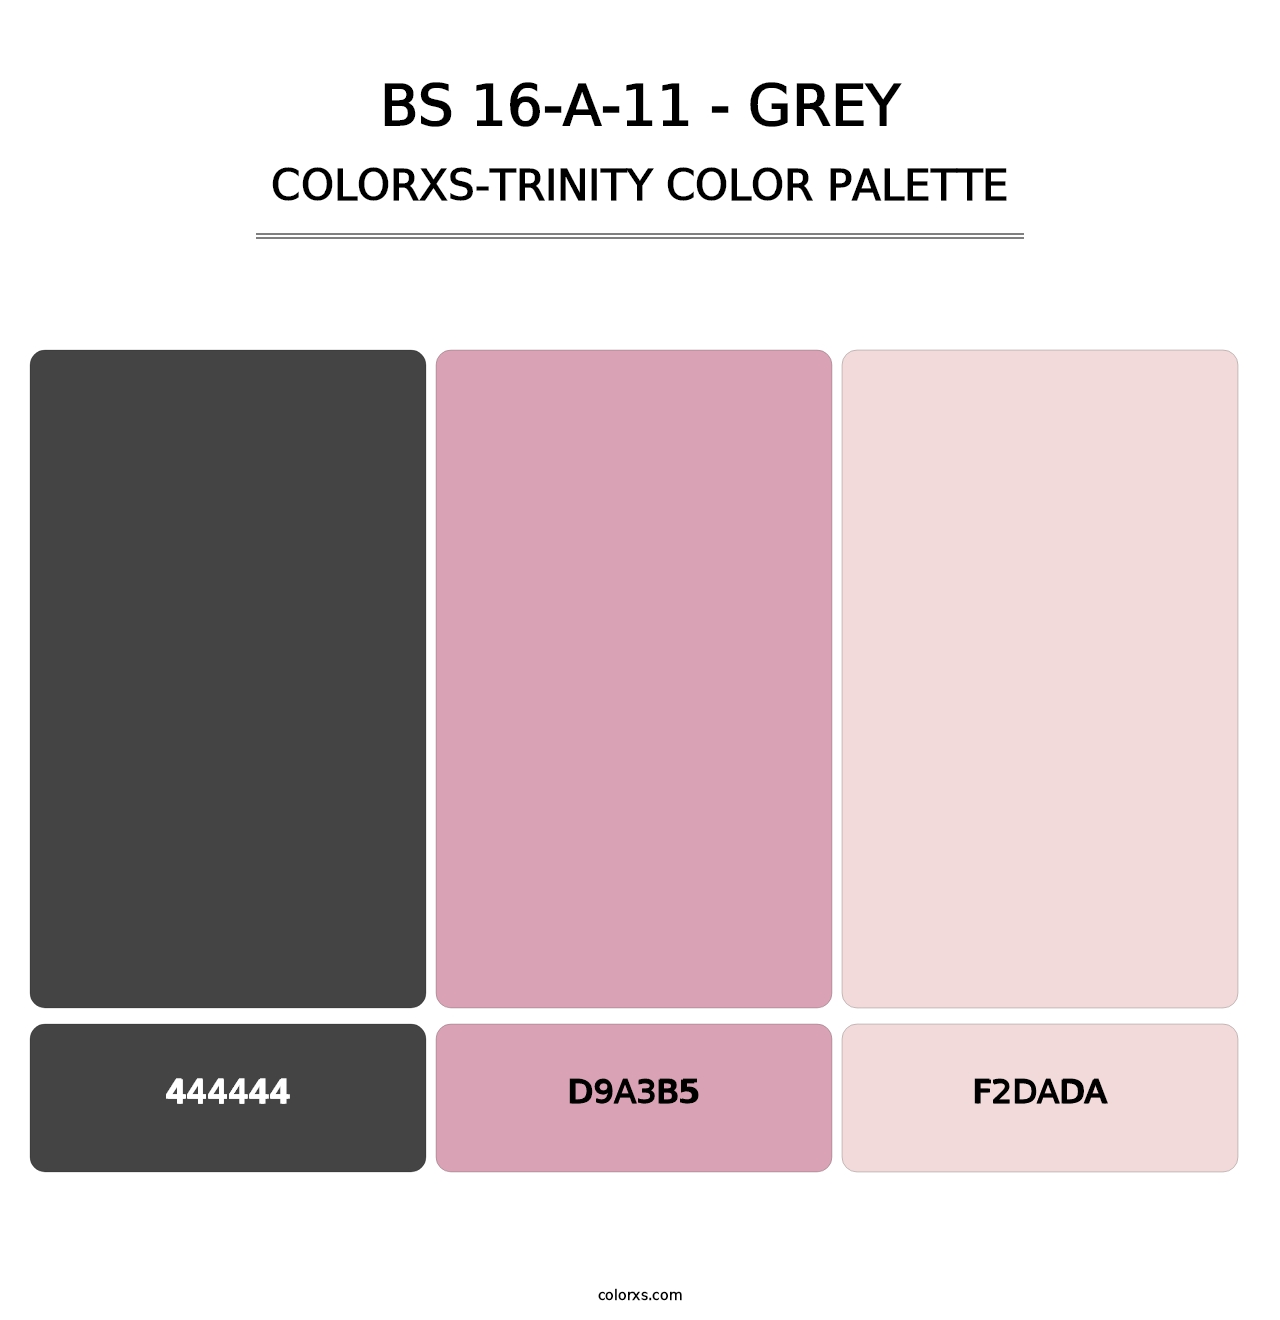 BS 16-A-11 - Grey - Colorxs Trinity Palette